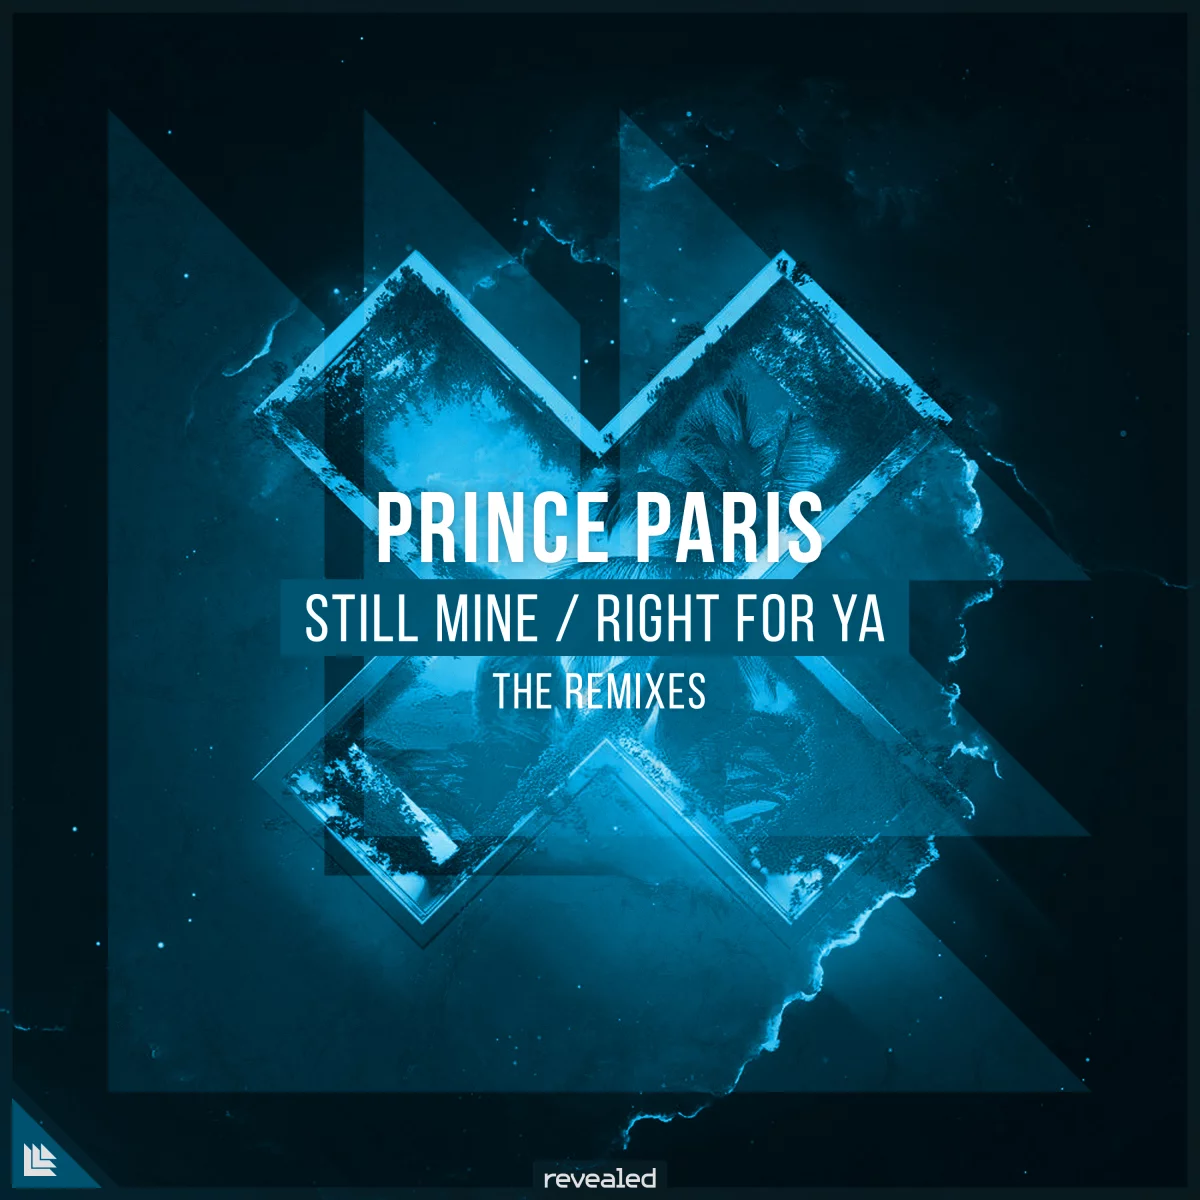 Still Mine / Right For Ya (The Remixes) - Prince Paris⁠ 